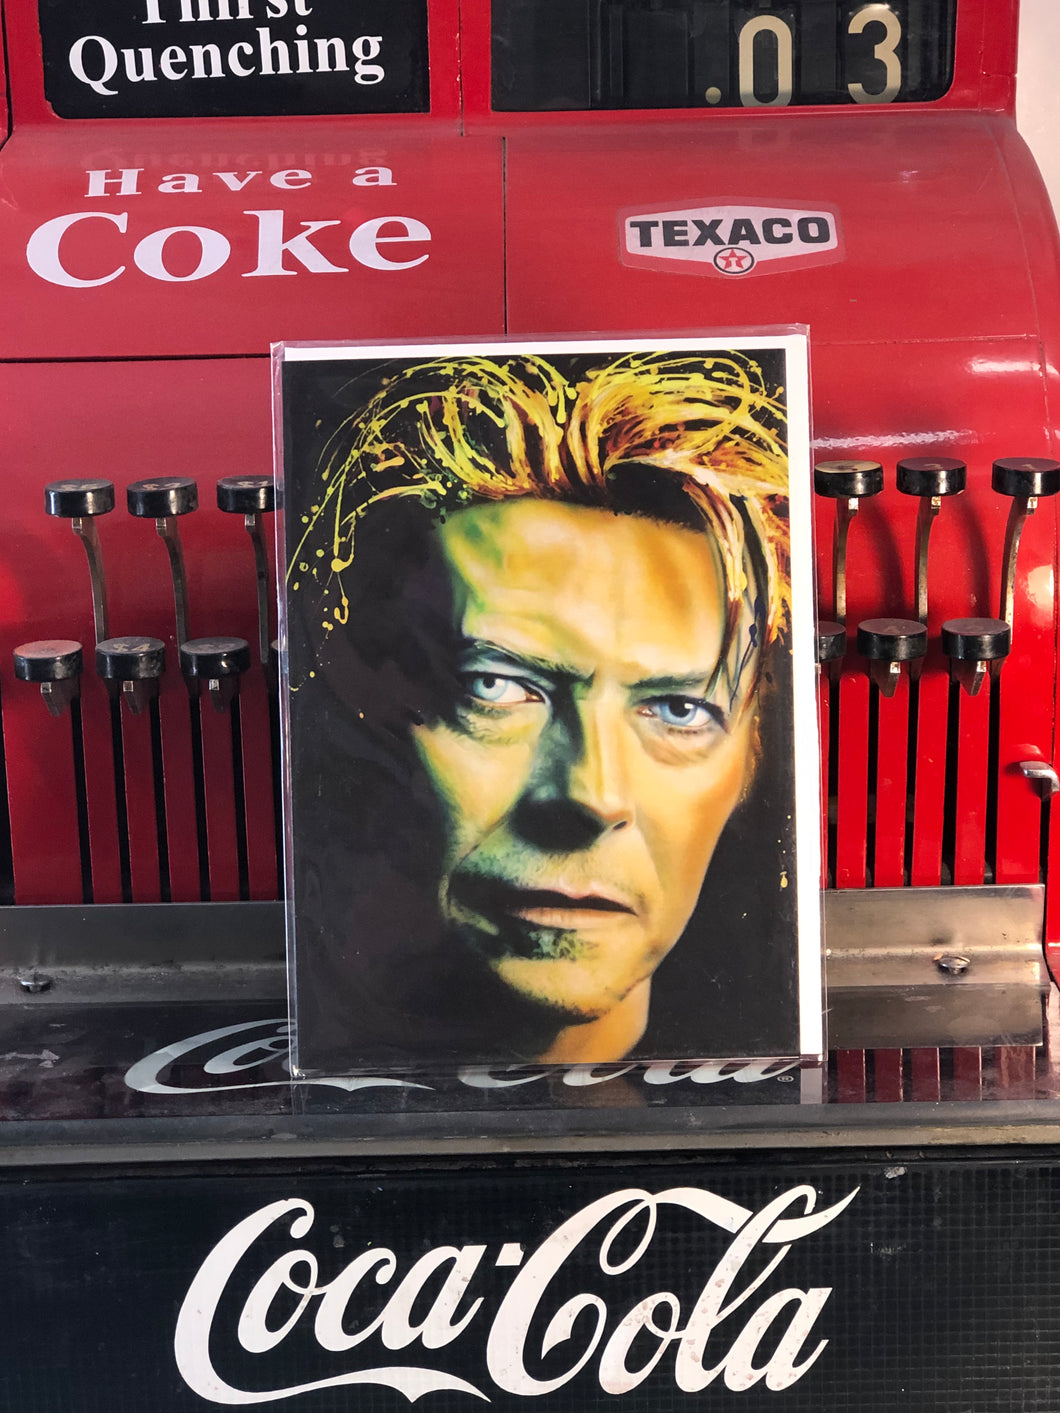 Bowie 2 Greeting card